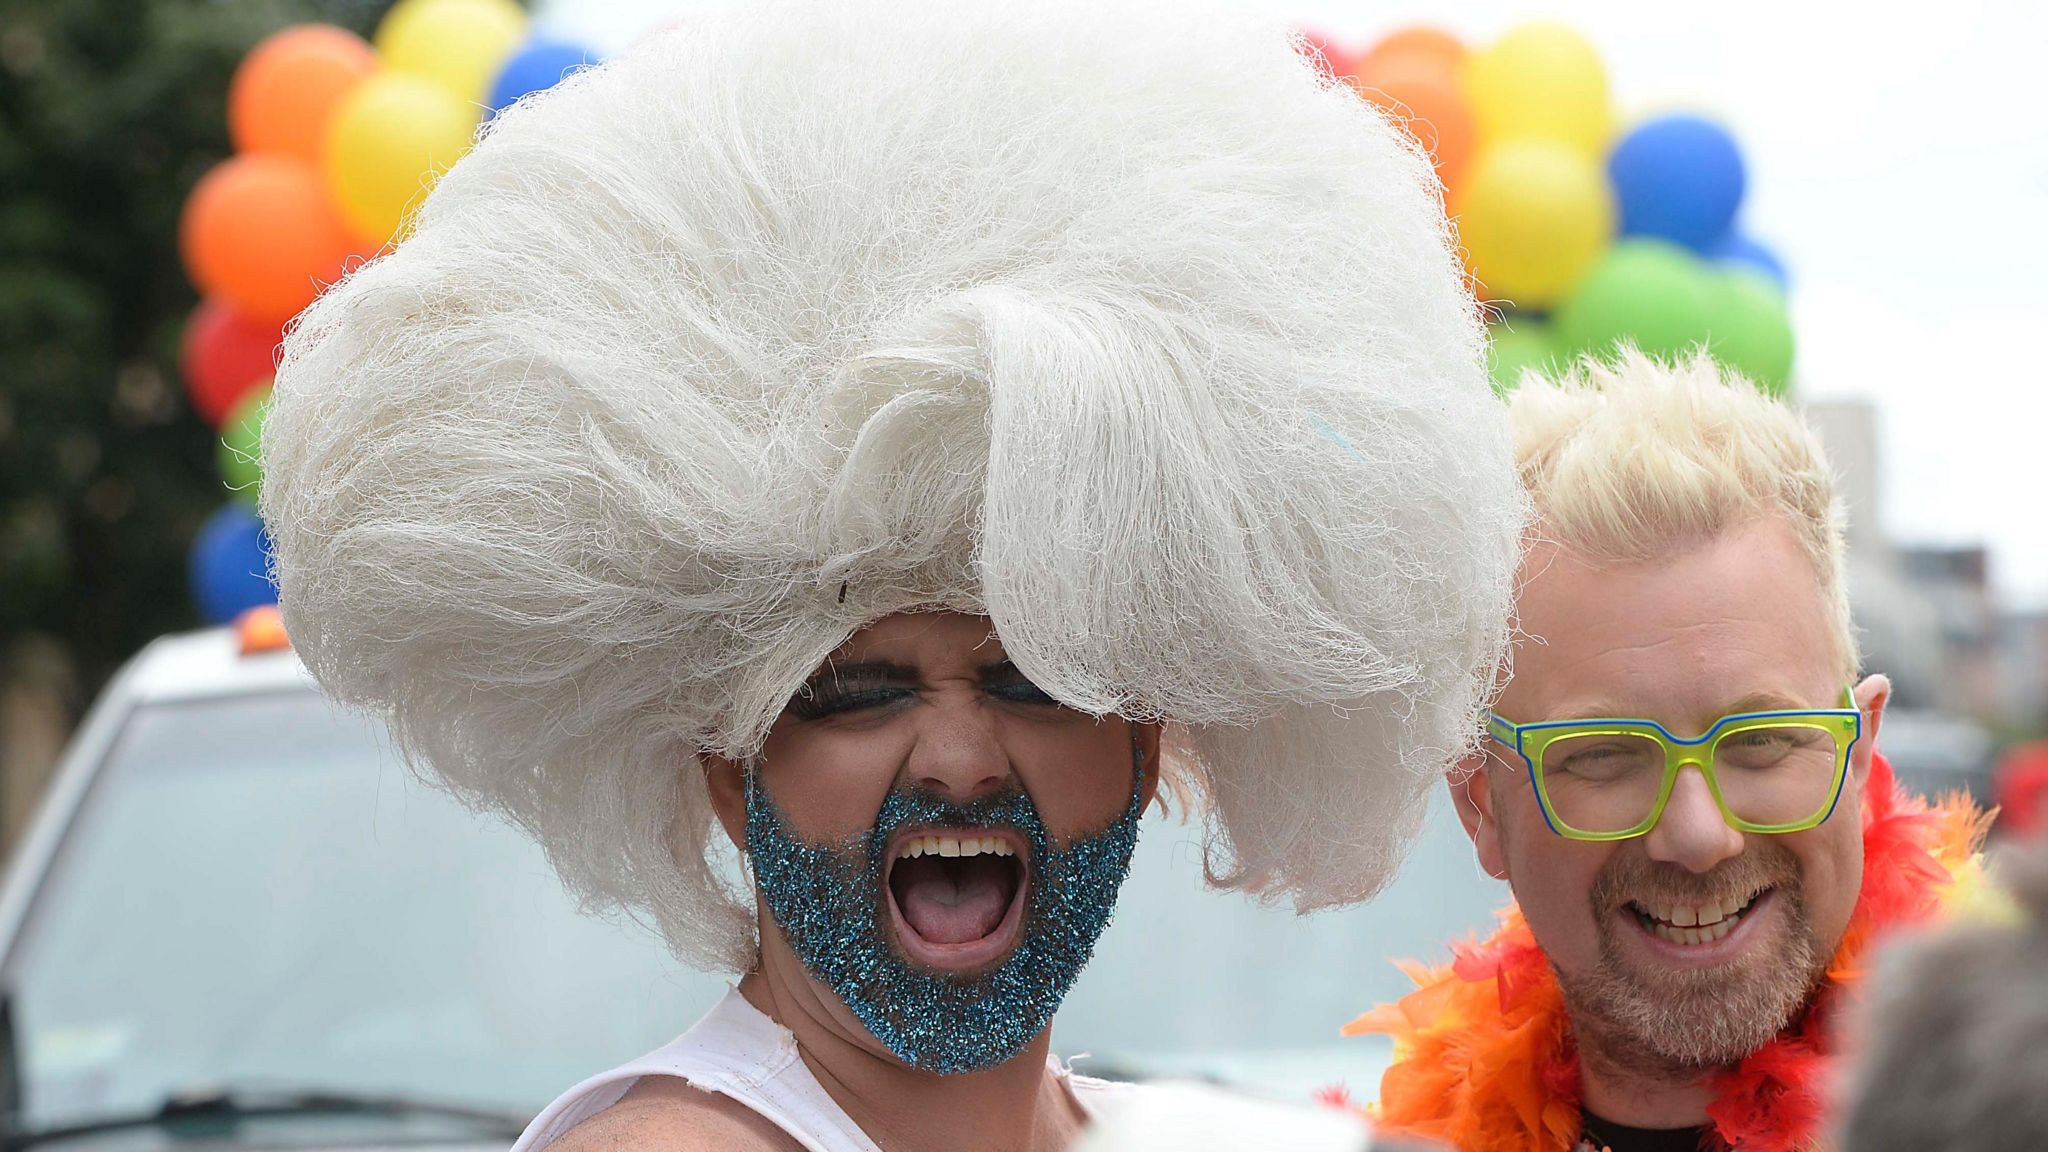 Two people in the parade. One has a white wig and a glittery beard. The other is wearing green glasses and wearing bright orange 